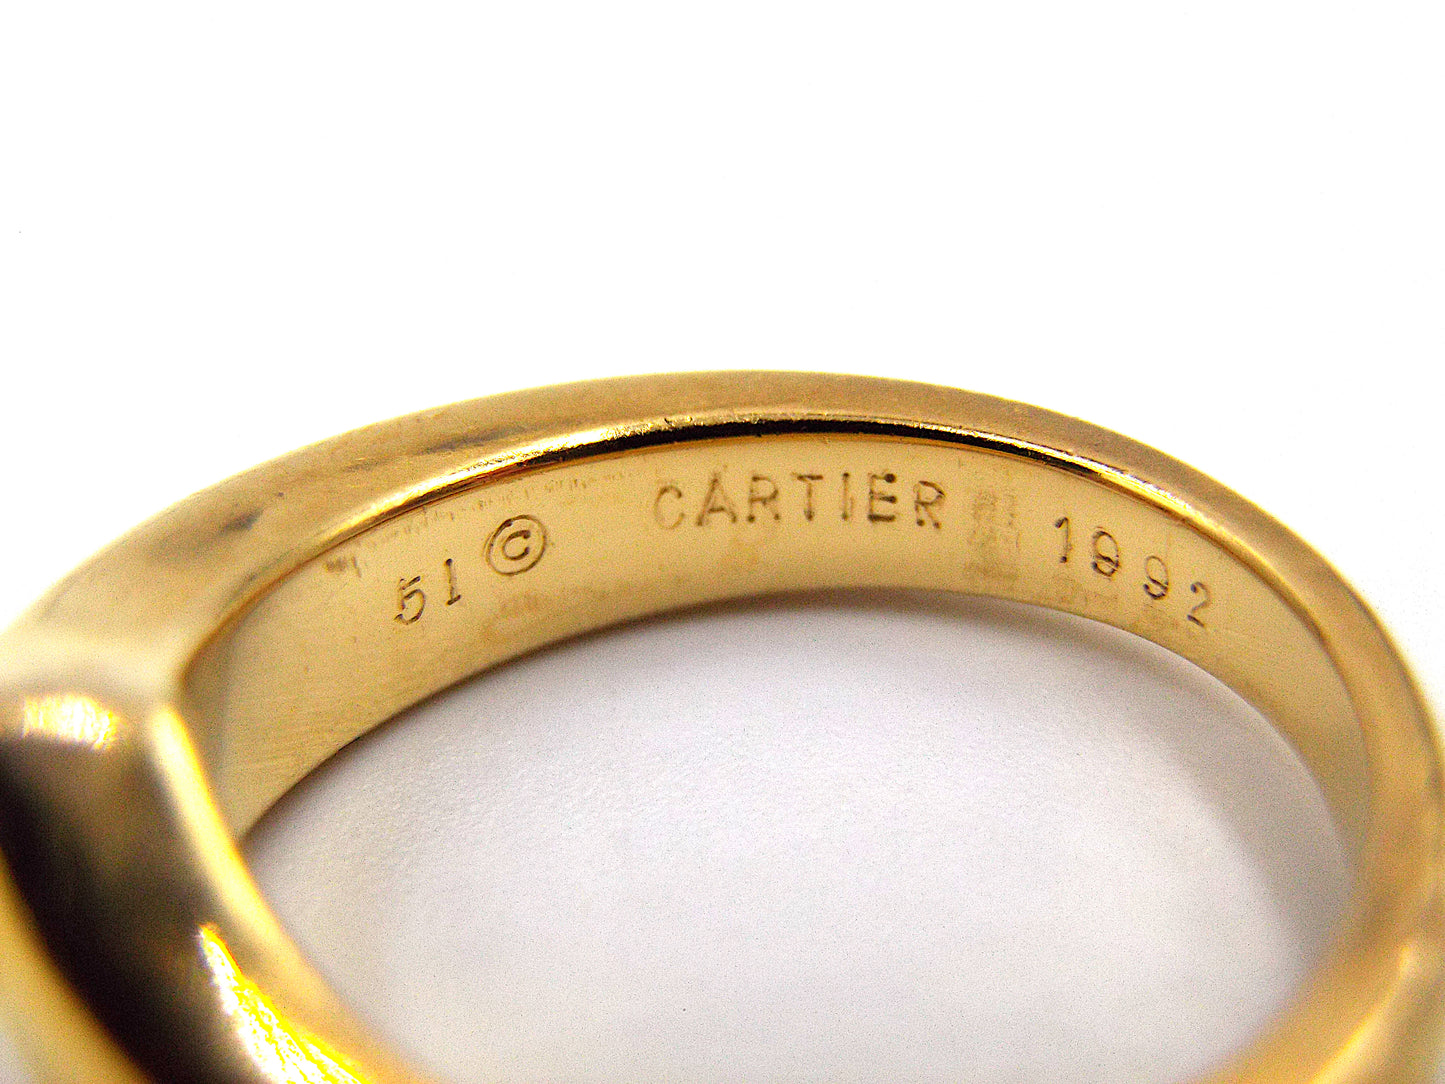 Cartier Diamond, Gold Rings, French